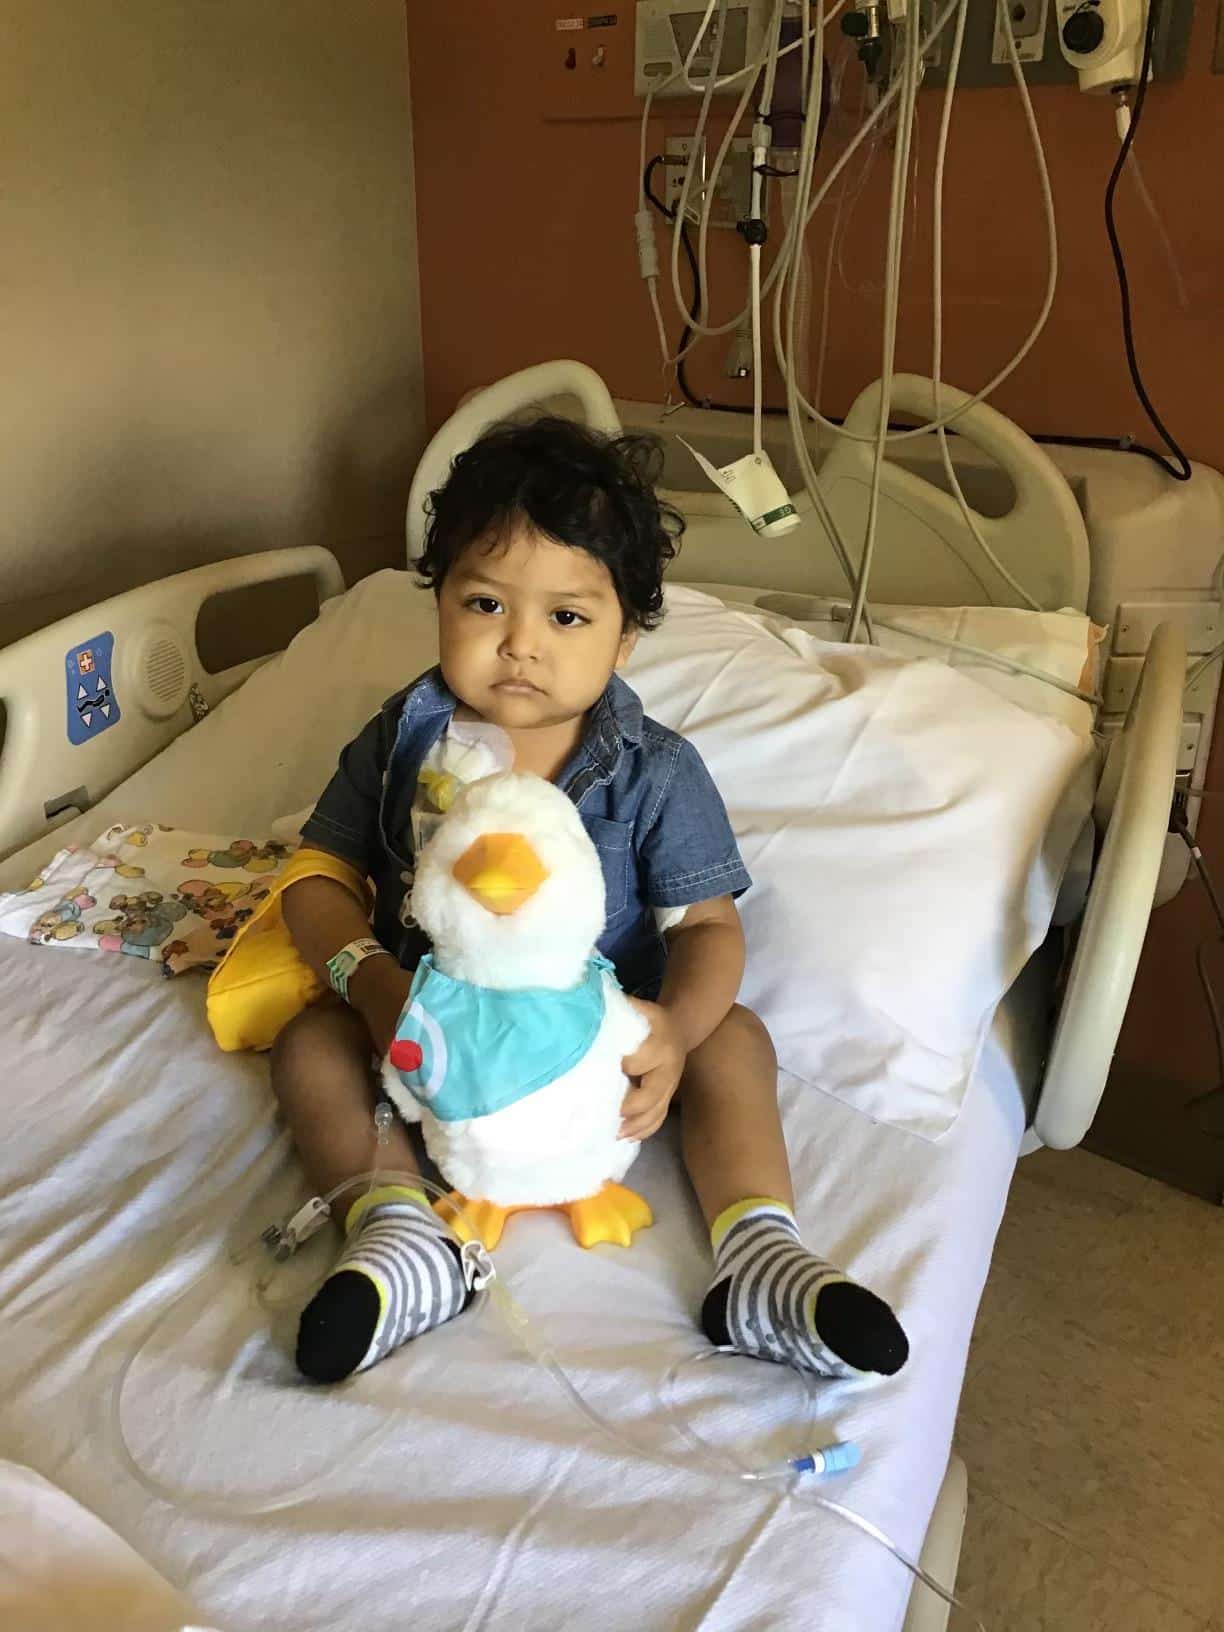 Pediatric patient Miguel Morales sits in a hospital bed with a stuffed animal.